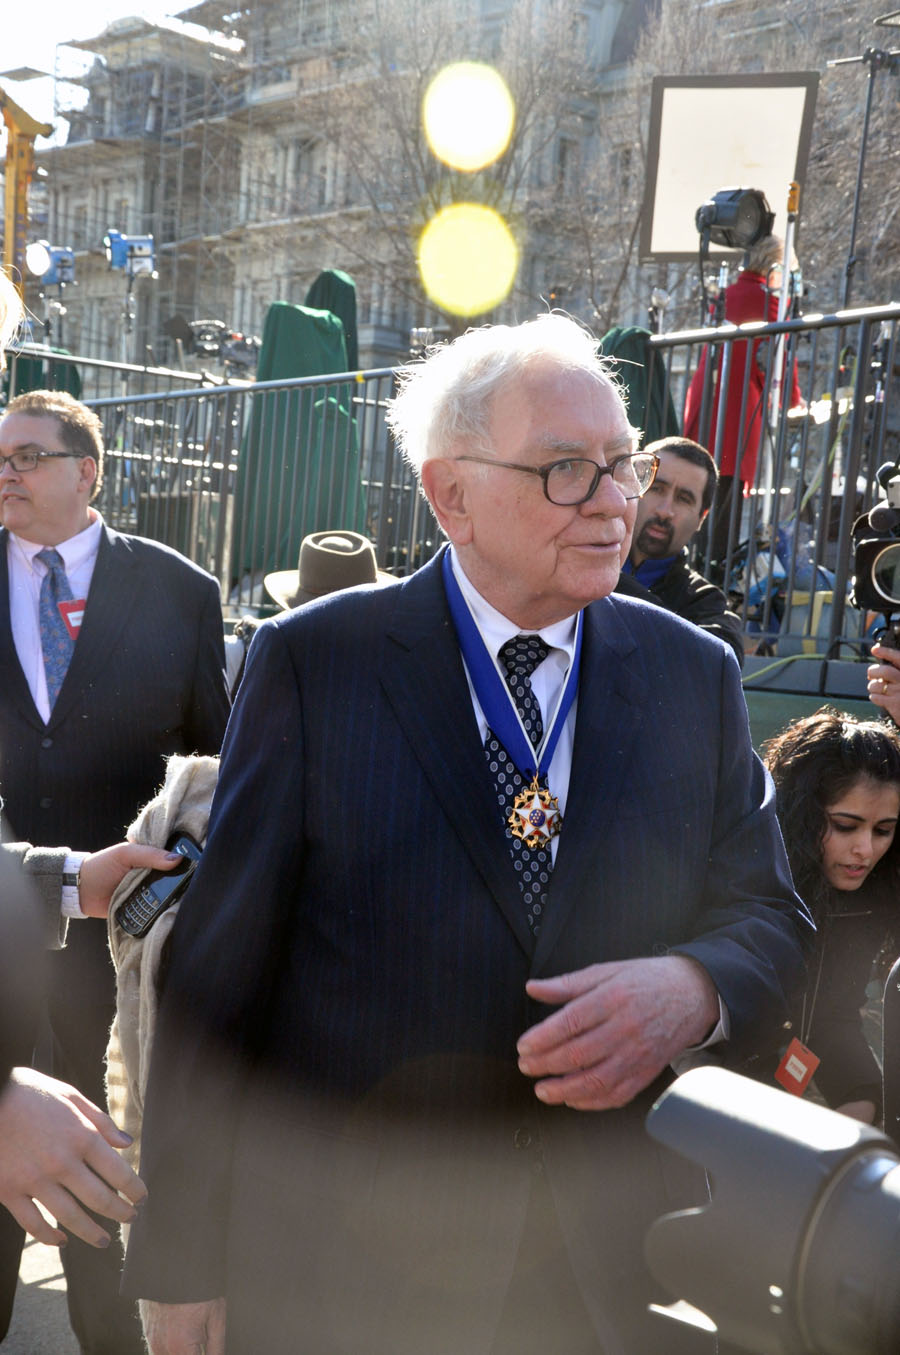 A photograph of Warren Buffet, dressed in a blue suit jacket, white shirt, and dotted tie, with his hand in front of his torso. His Presidential Medal of Freedom is around his neck. Behind him a grey brick building and a two people are visible.